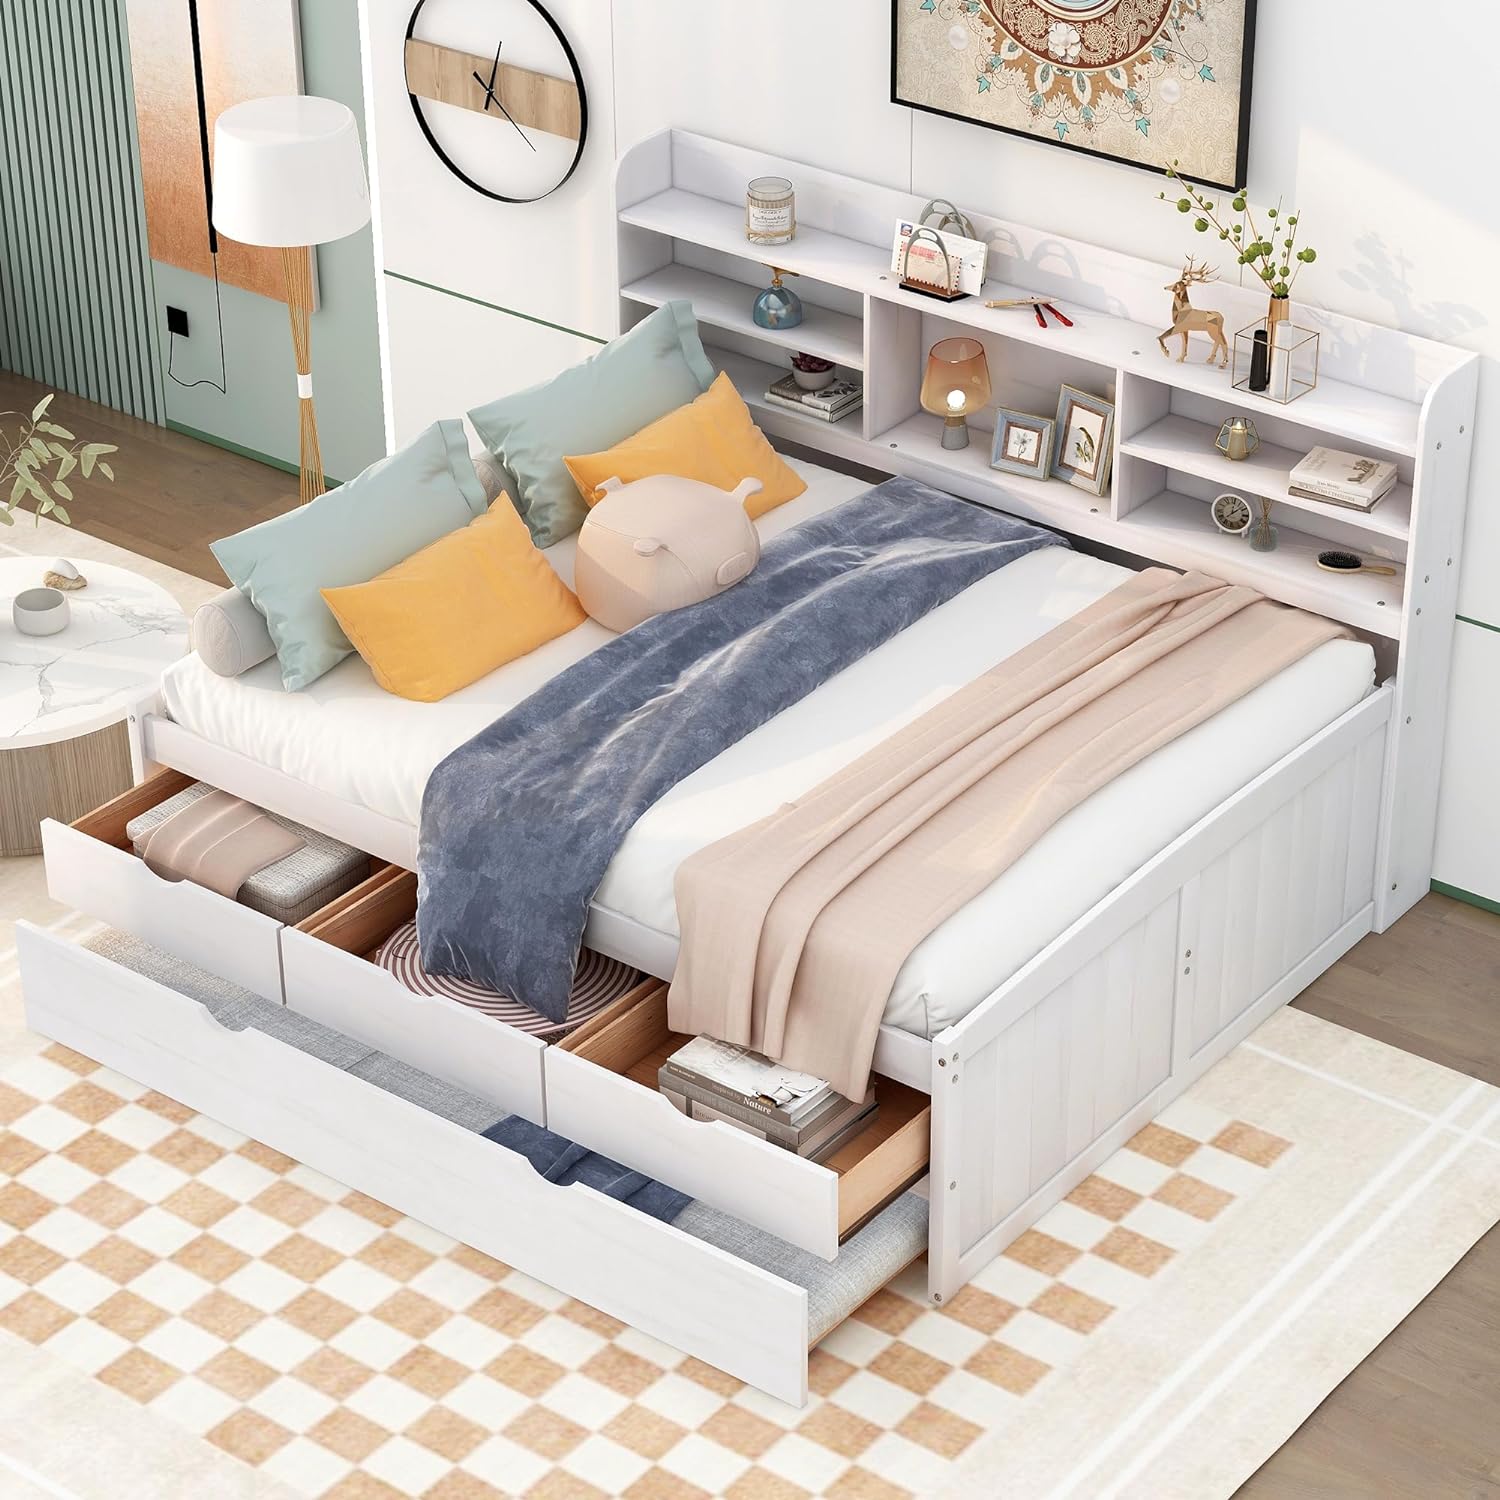 bed with built-in storage drawers